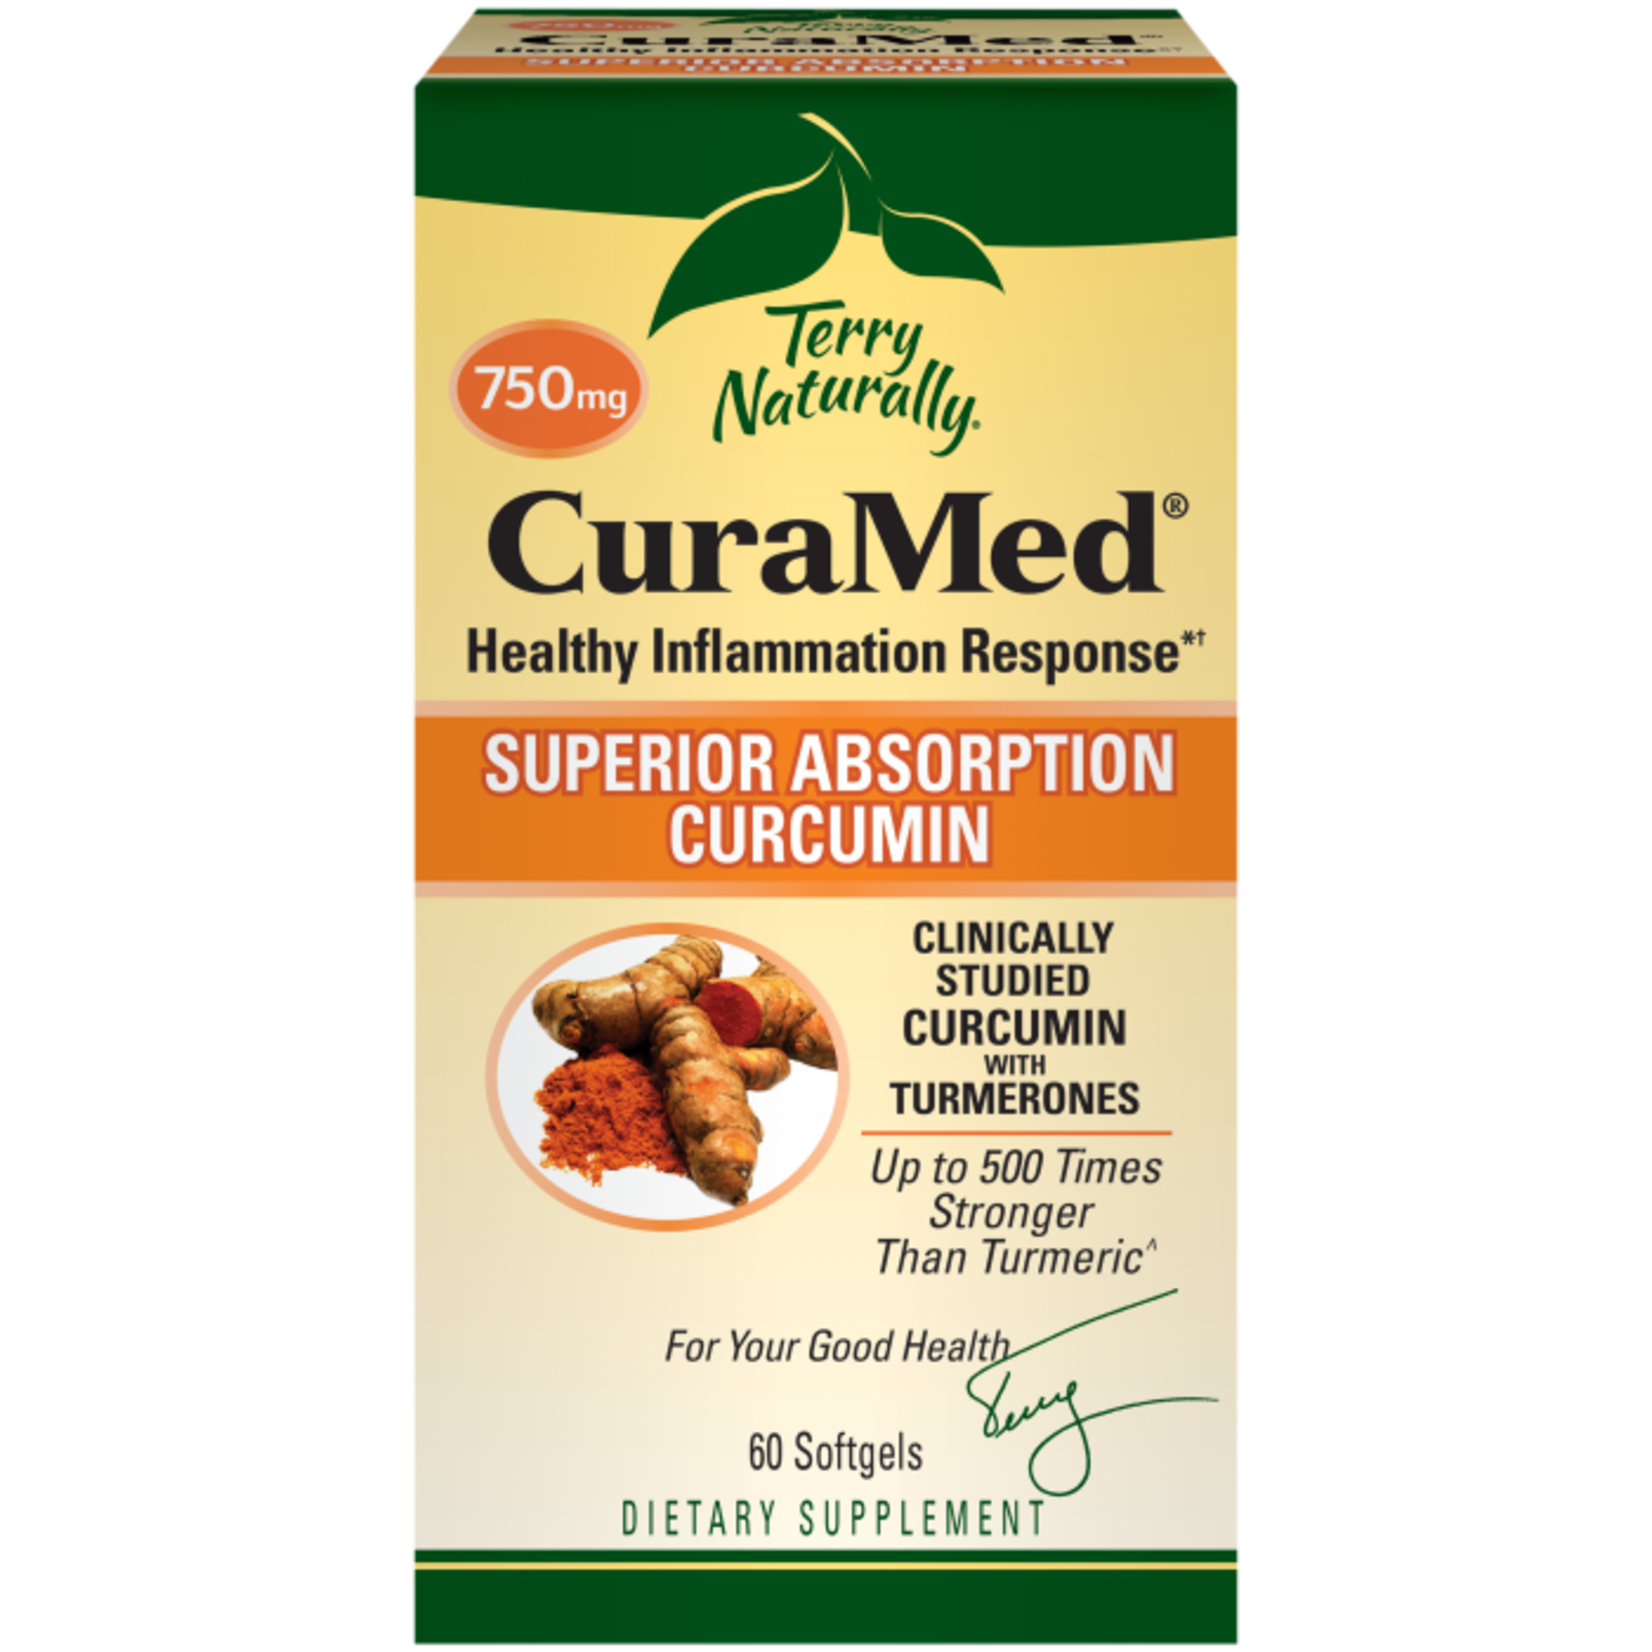 Terry Naturally Terry Naturally - Curamed 750 mg - 60 Softgels